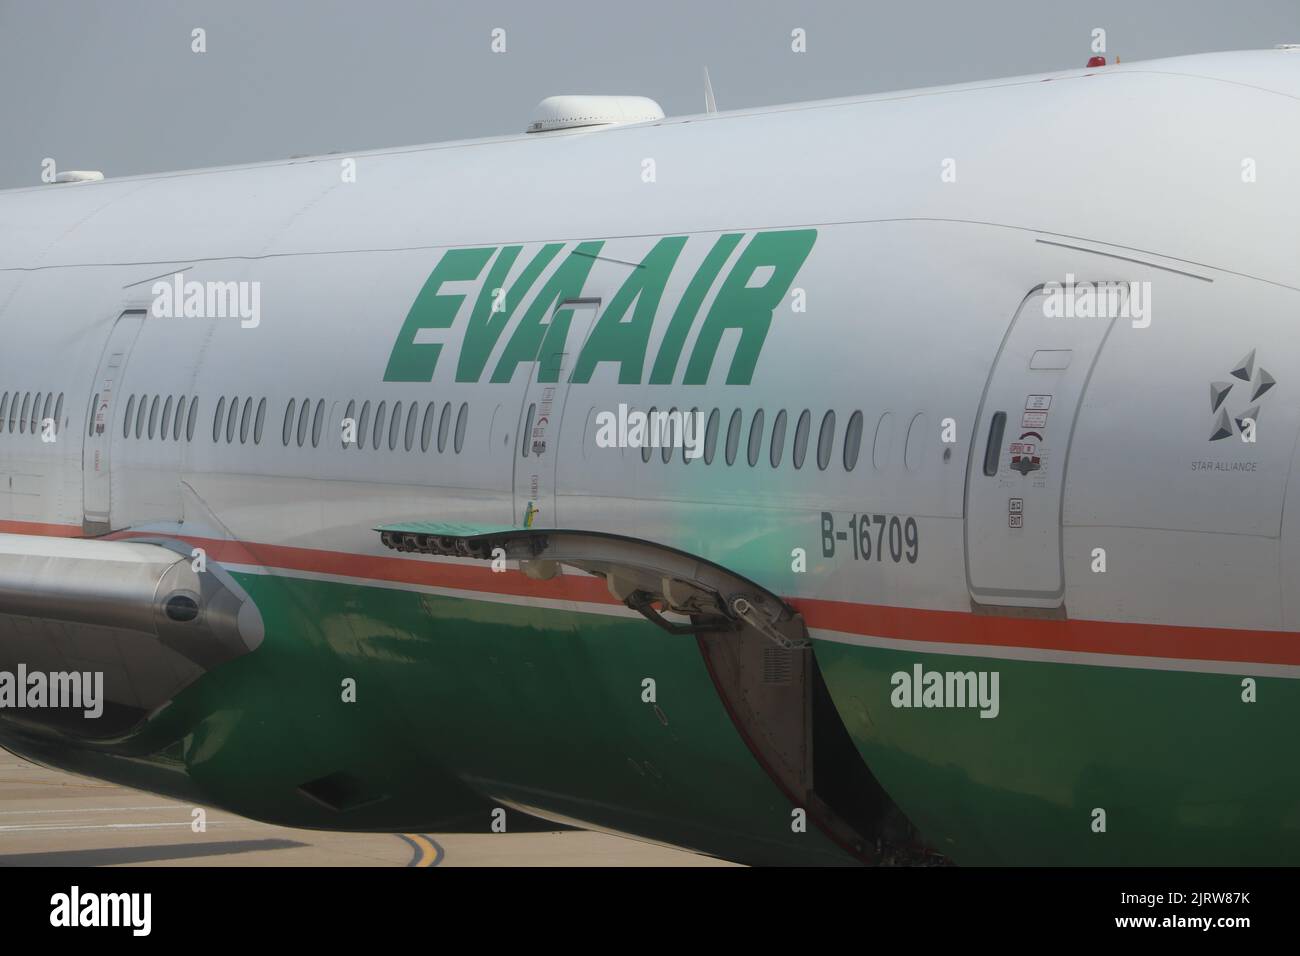 The aircraft body of EVA Air Boeing B777-300ER in Shangai Pudong Airport, China Stock Photo